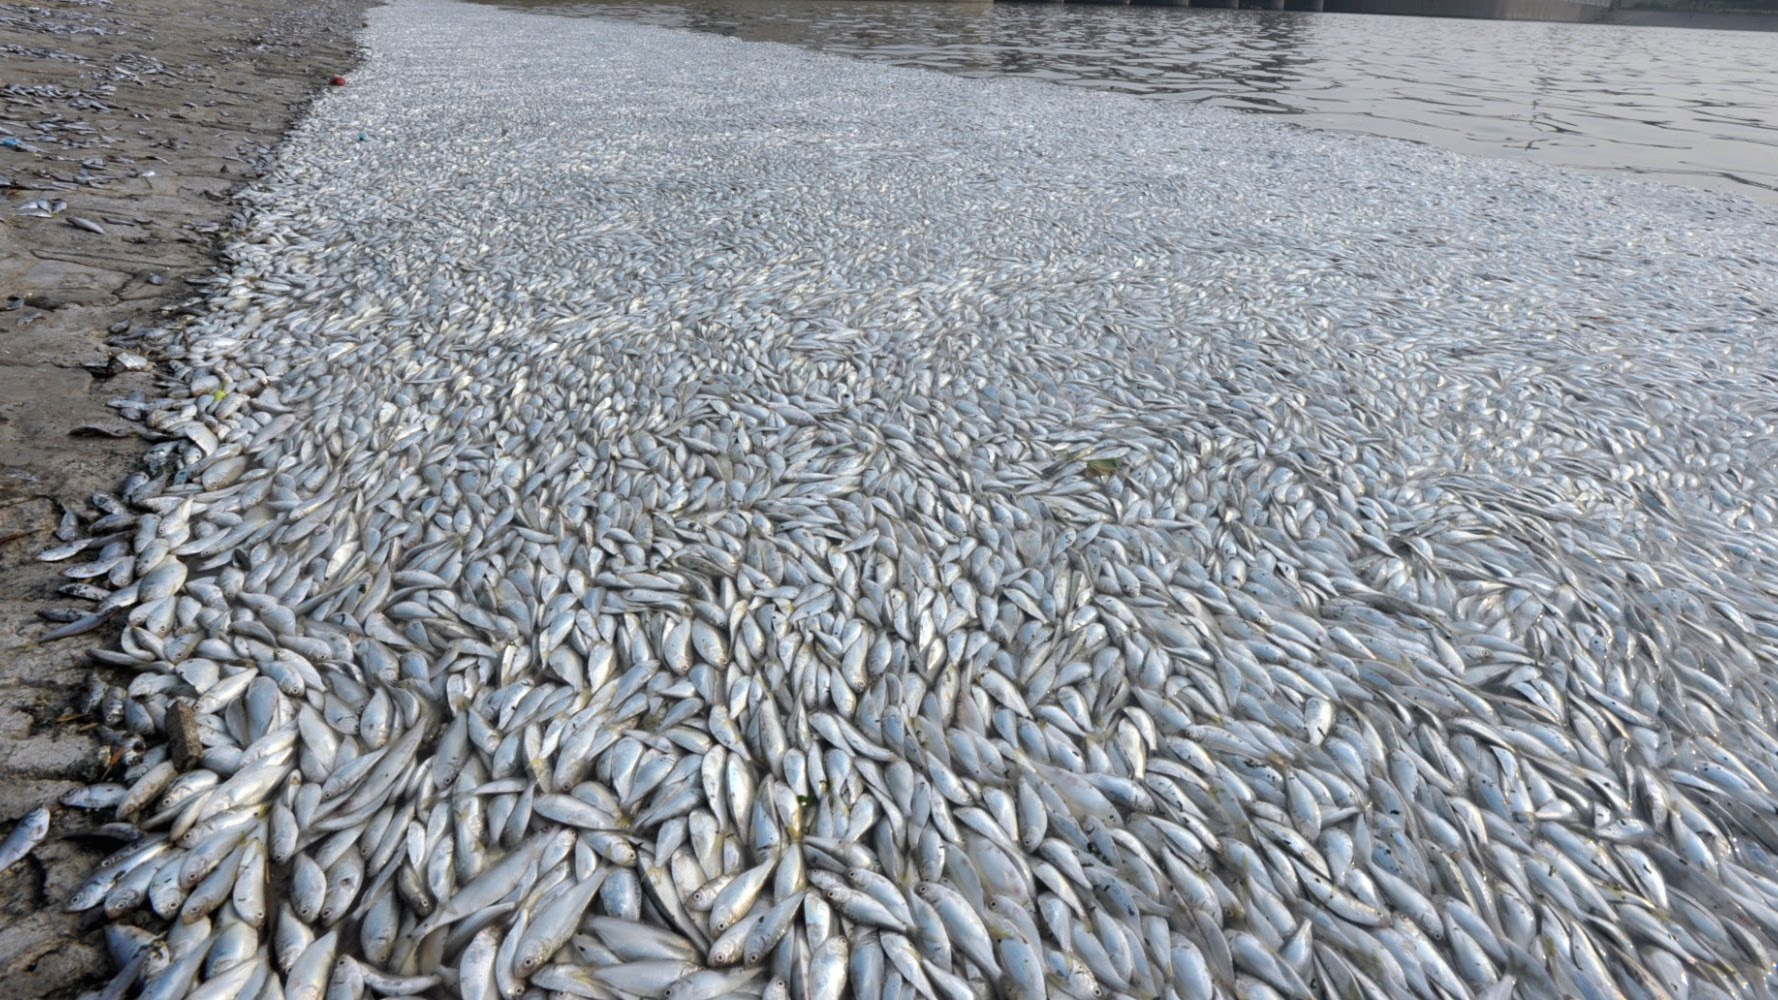 Thousands of Dead Fish Mysteriously Appear in New York Waterway